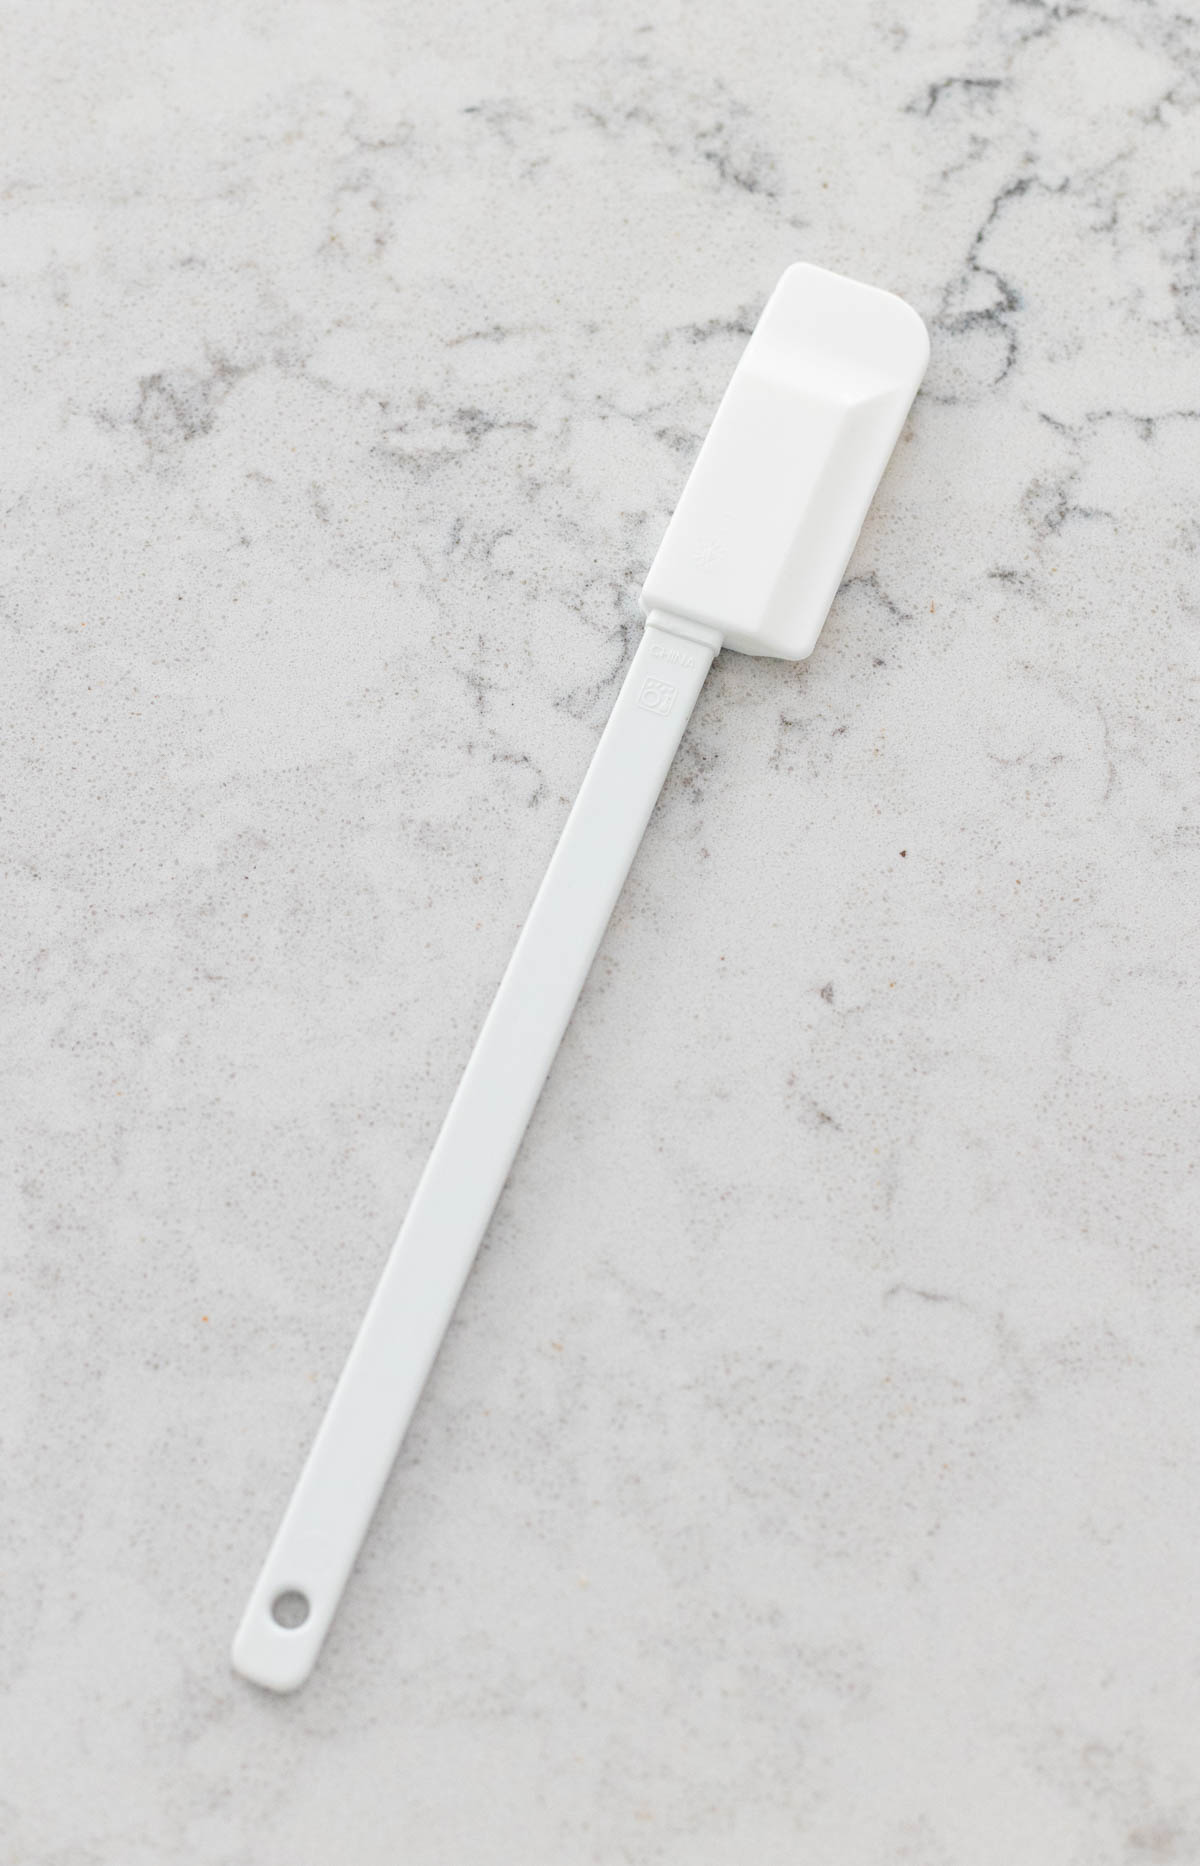 A long handled narrow spatula is on the counter.